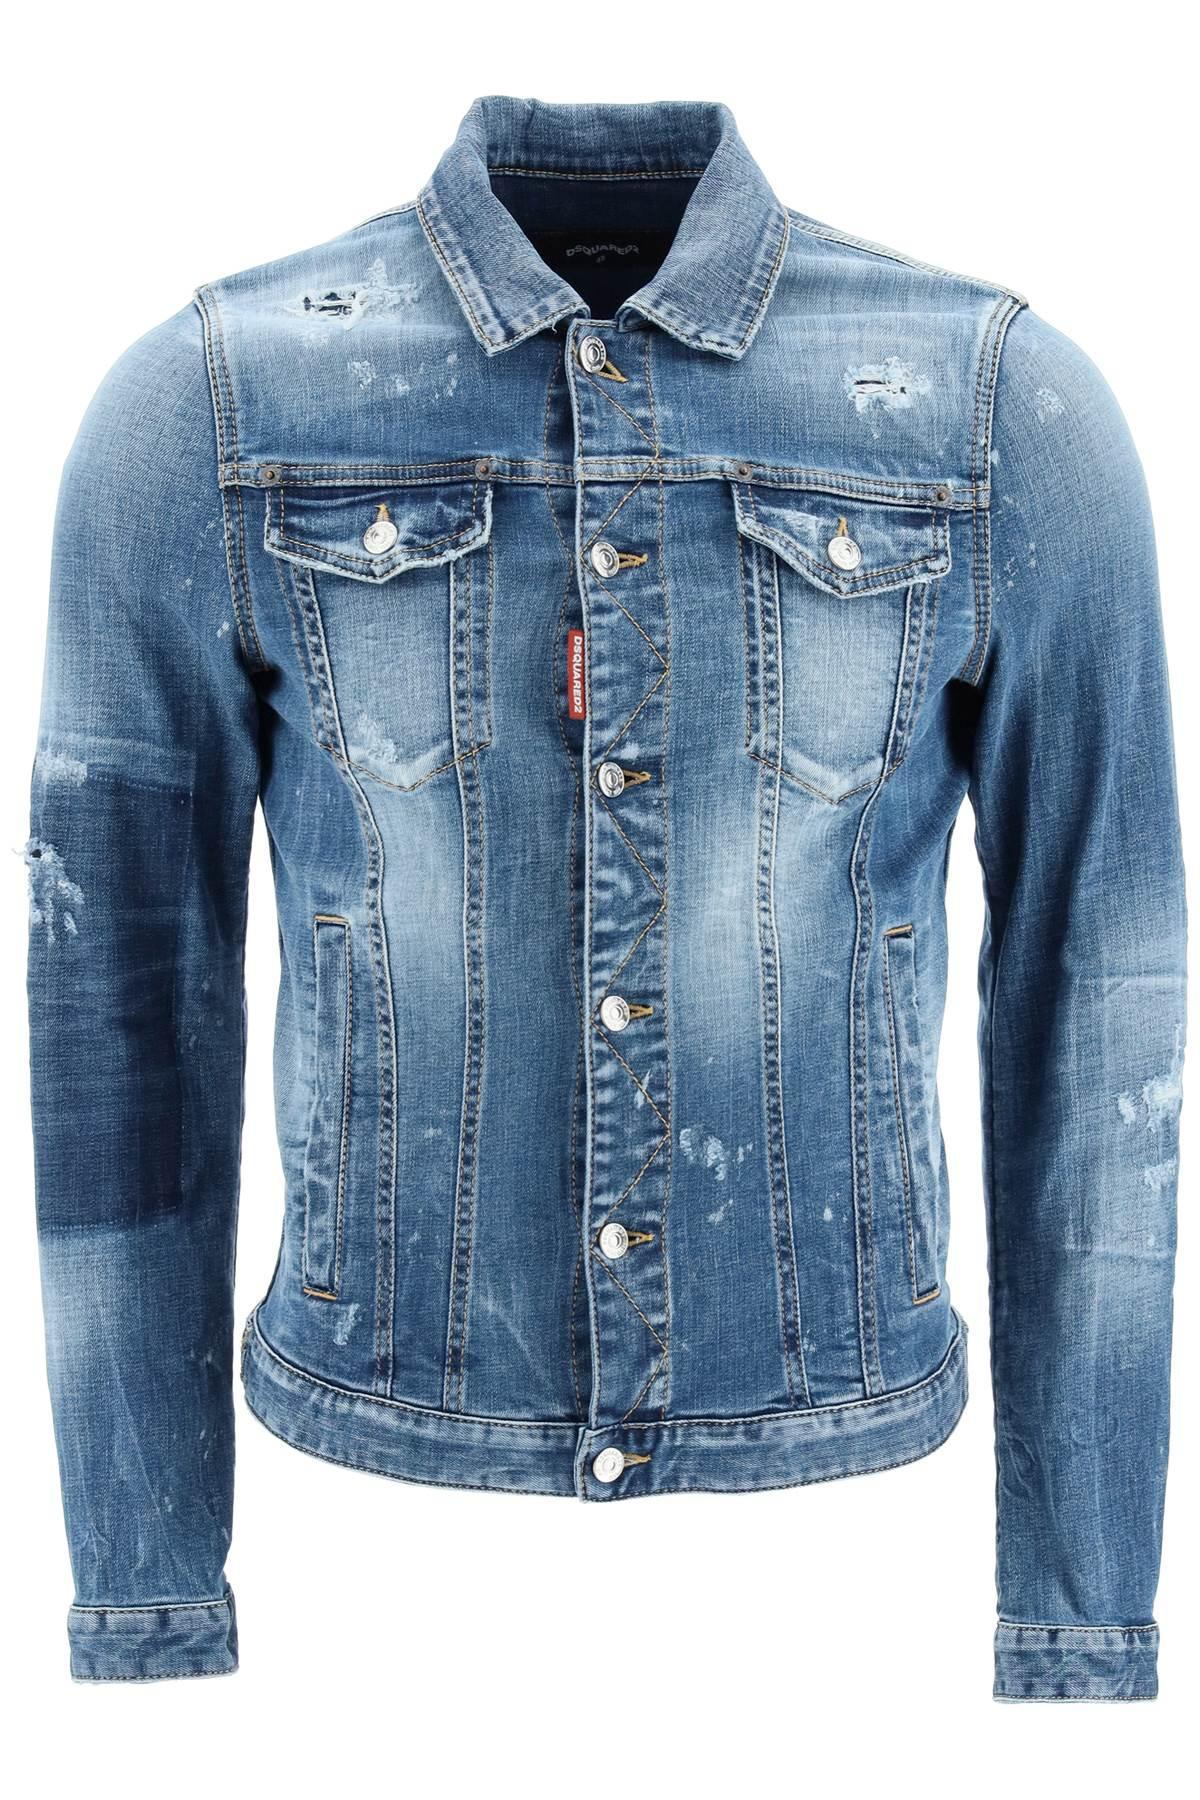 DSquared² Classic Jean Jacket in Blue for Men | Lyst